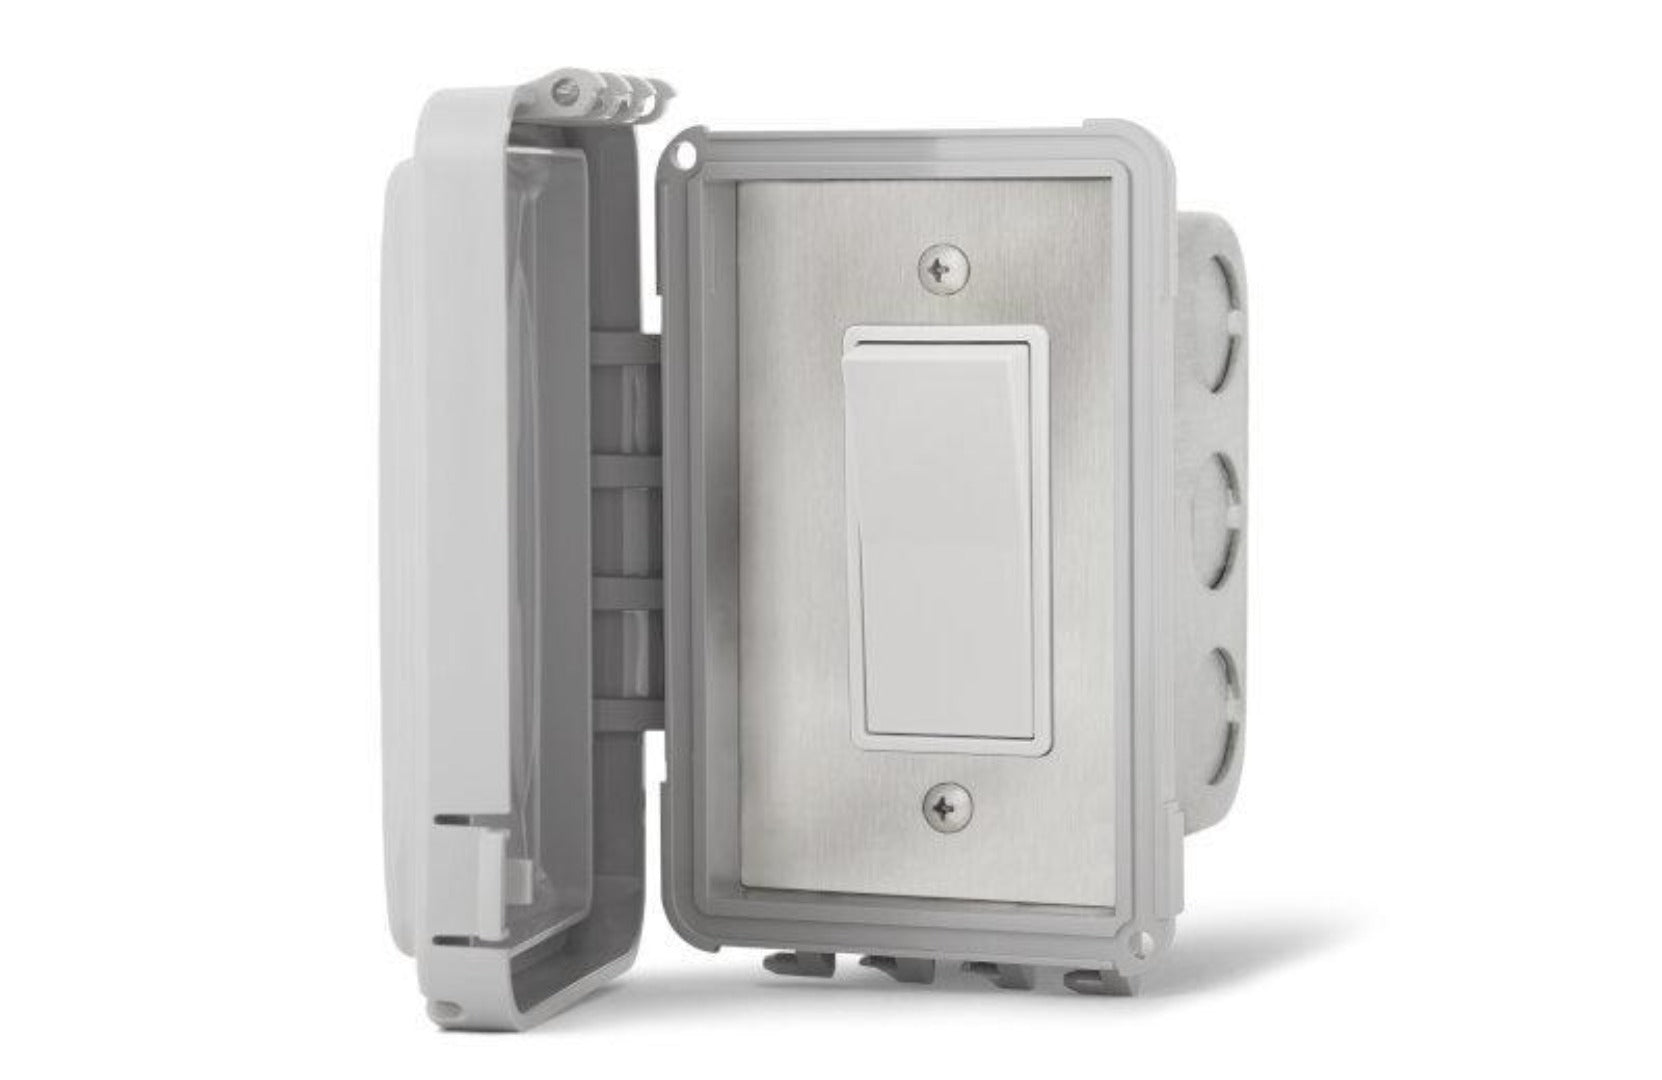 Infratech Simple Switches